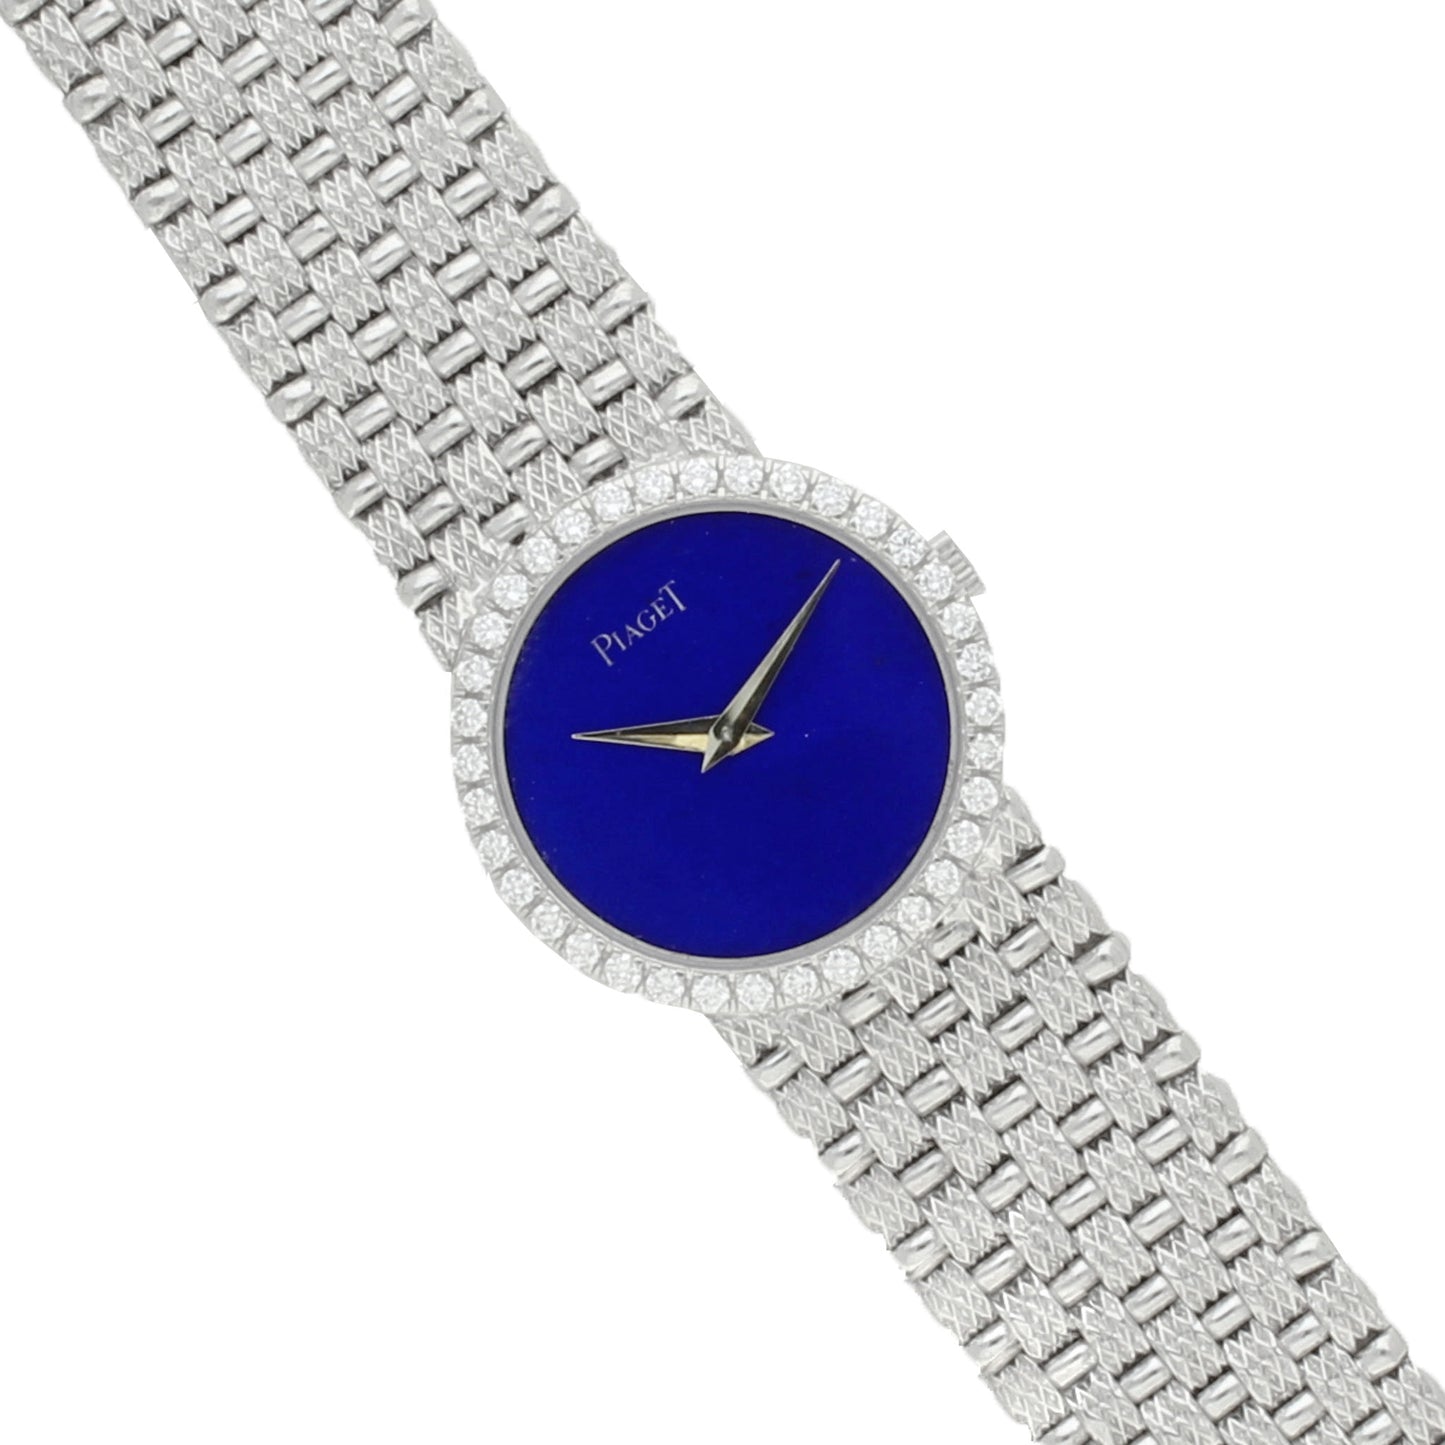 18ct white gold 'round cased' bracelet watch with lapis lazuli dial and diamond set bezel. Made 1970's